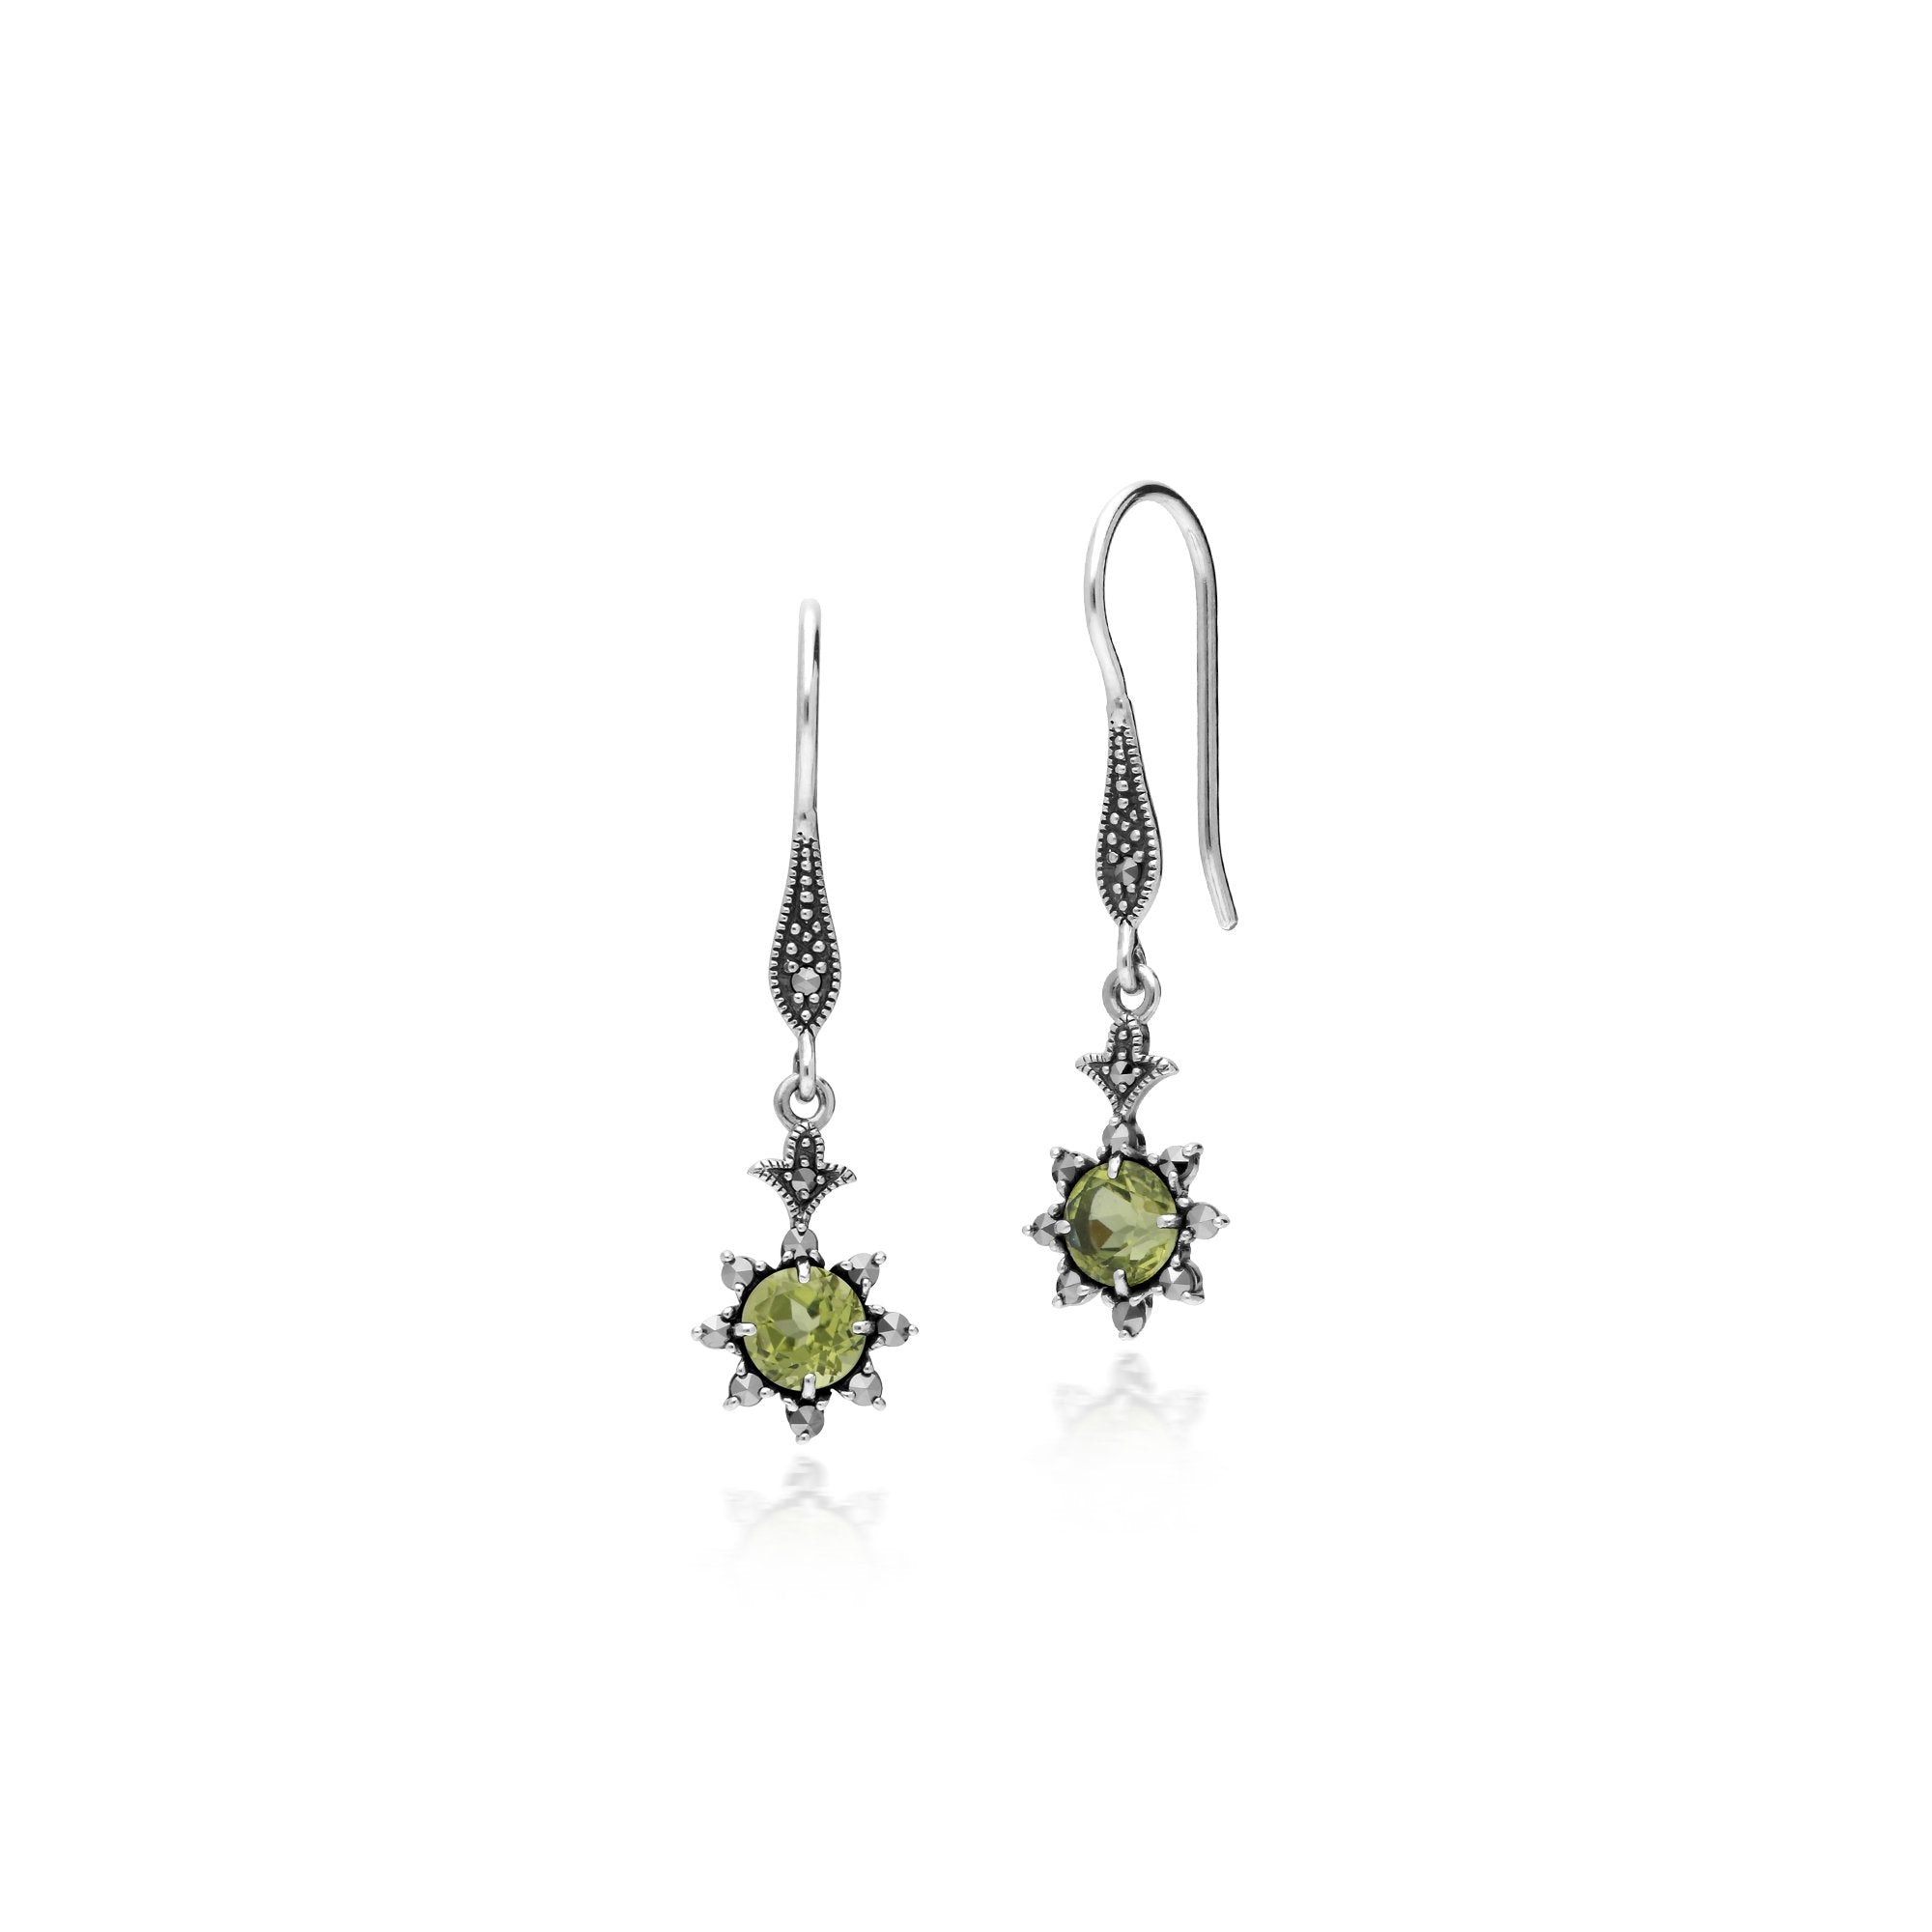 Floral Round Peridot & Marcasite Drop Earrings in 925 Sterling Silver